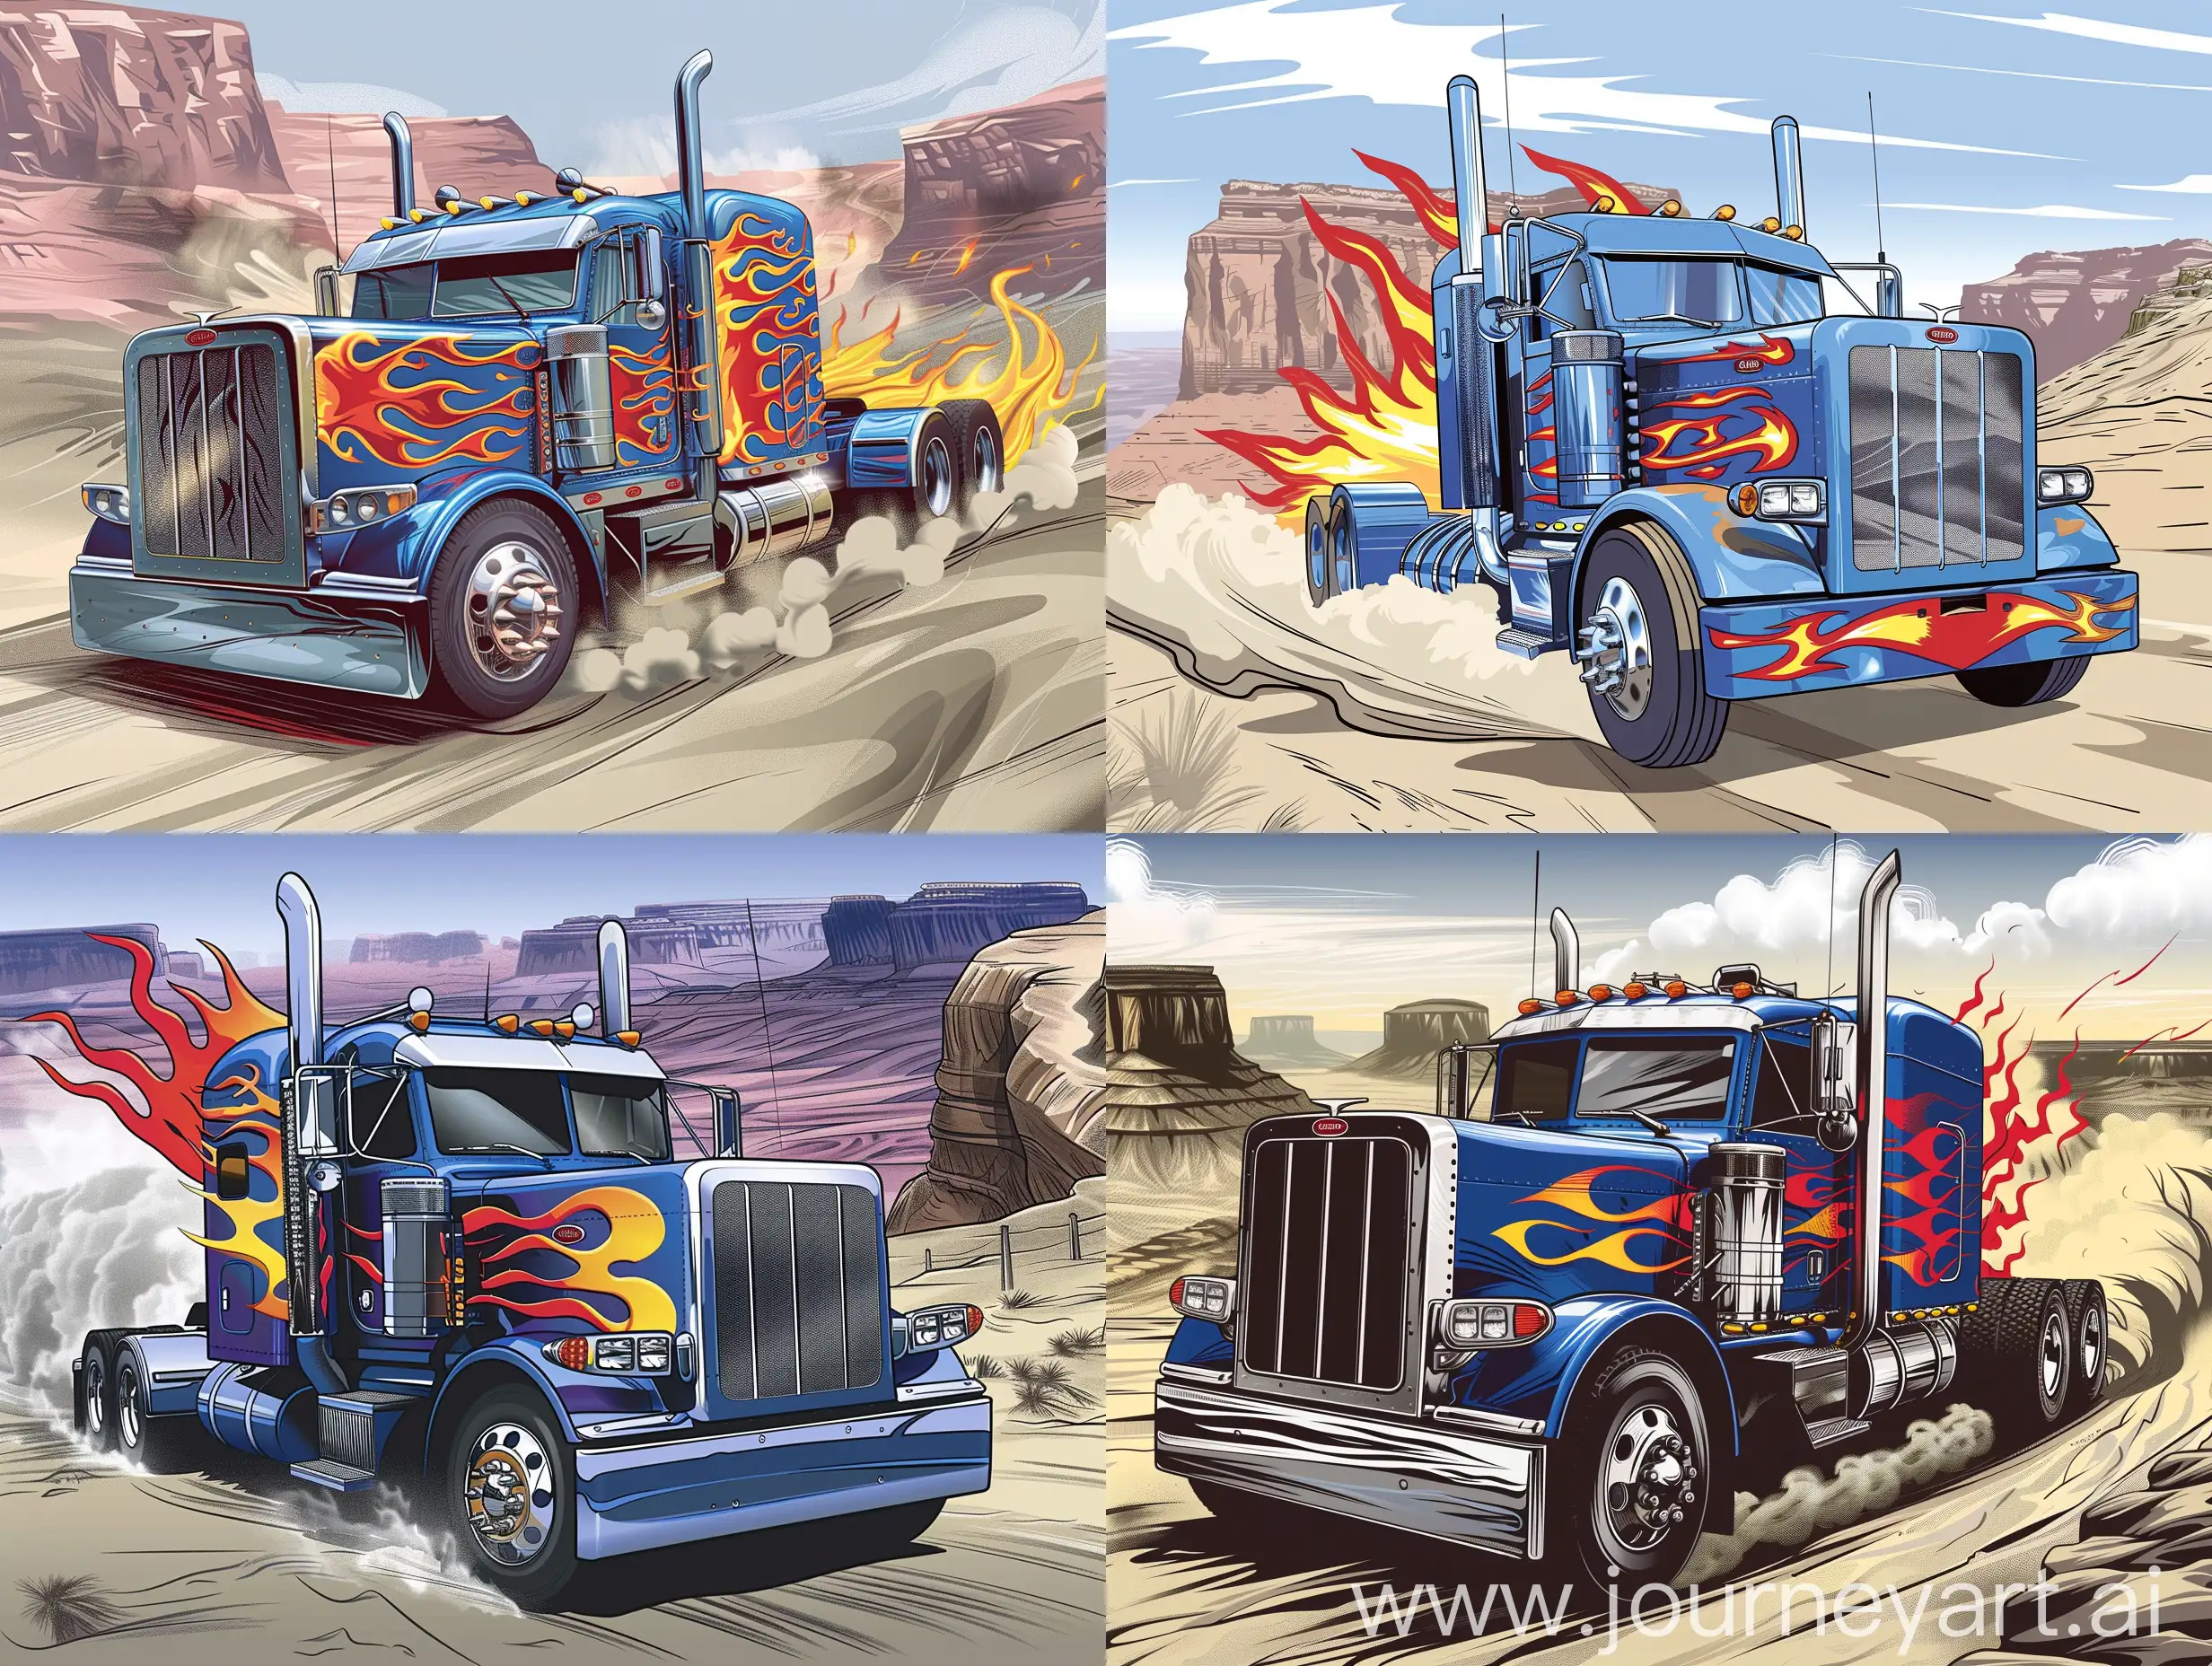 1994 Peterbilt 379 blue color truck with red and yellow flame pattern, drawing in the form of an illustration, canyon image in the background, sharp lines lineart illustration vector, dust and smoke coming out, the truck is going fast